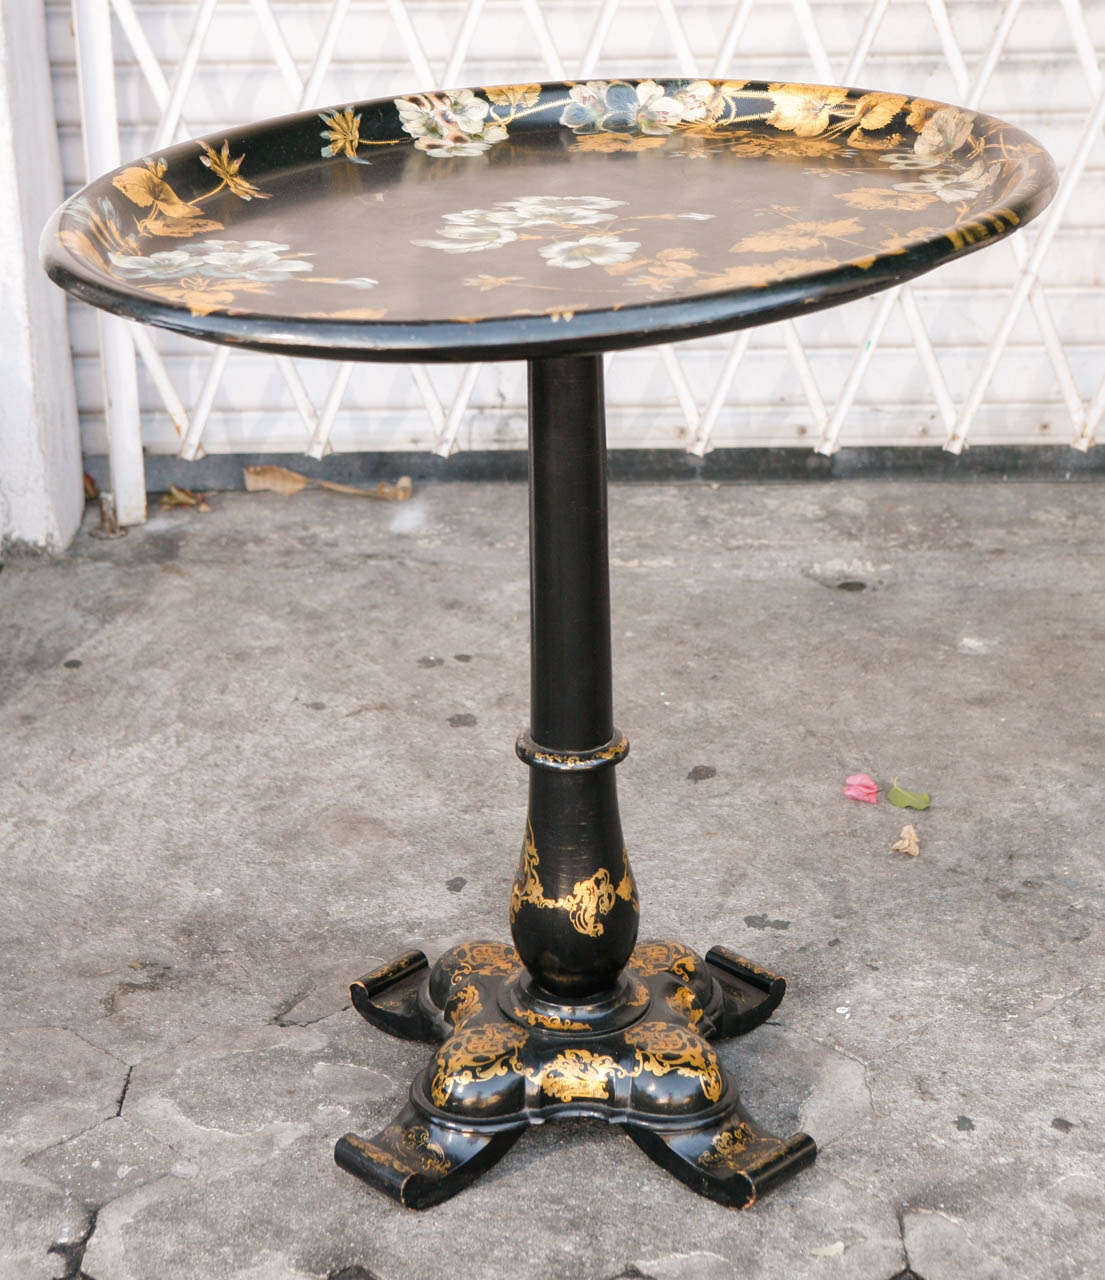 19th century French papier mâché flip-top tray table.  It is hand painted and gilded. The base diameter measurement is 17 inches.